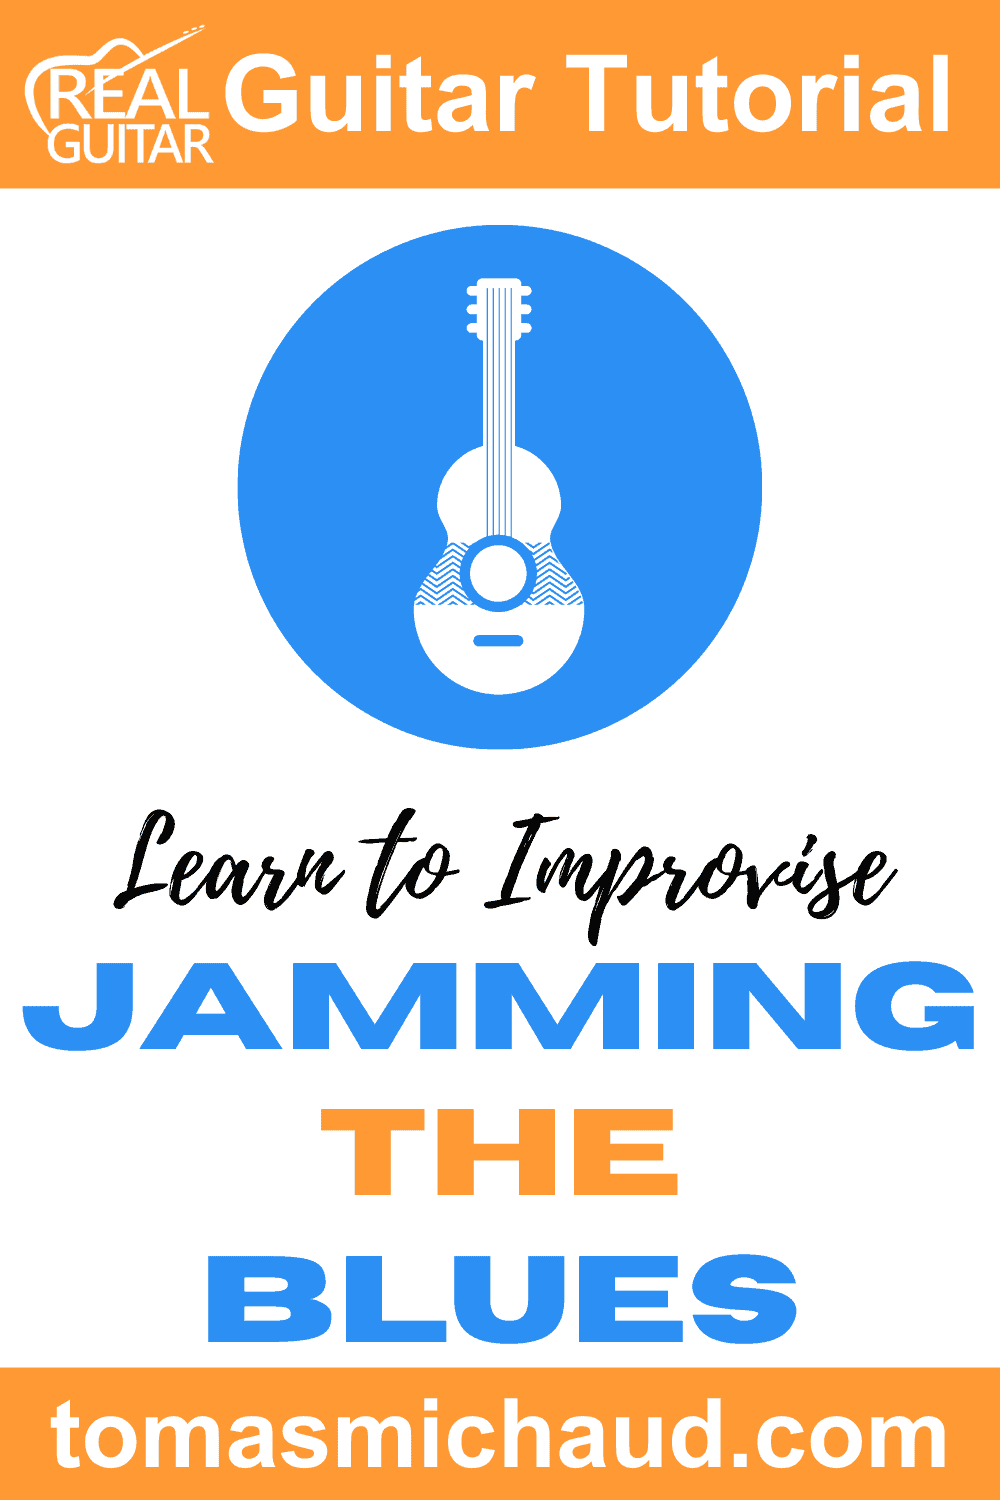 Learn to Improvise. Jamming the Blues